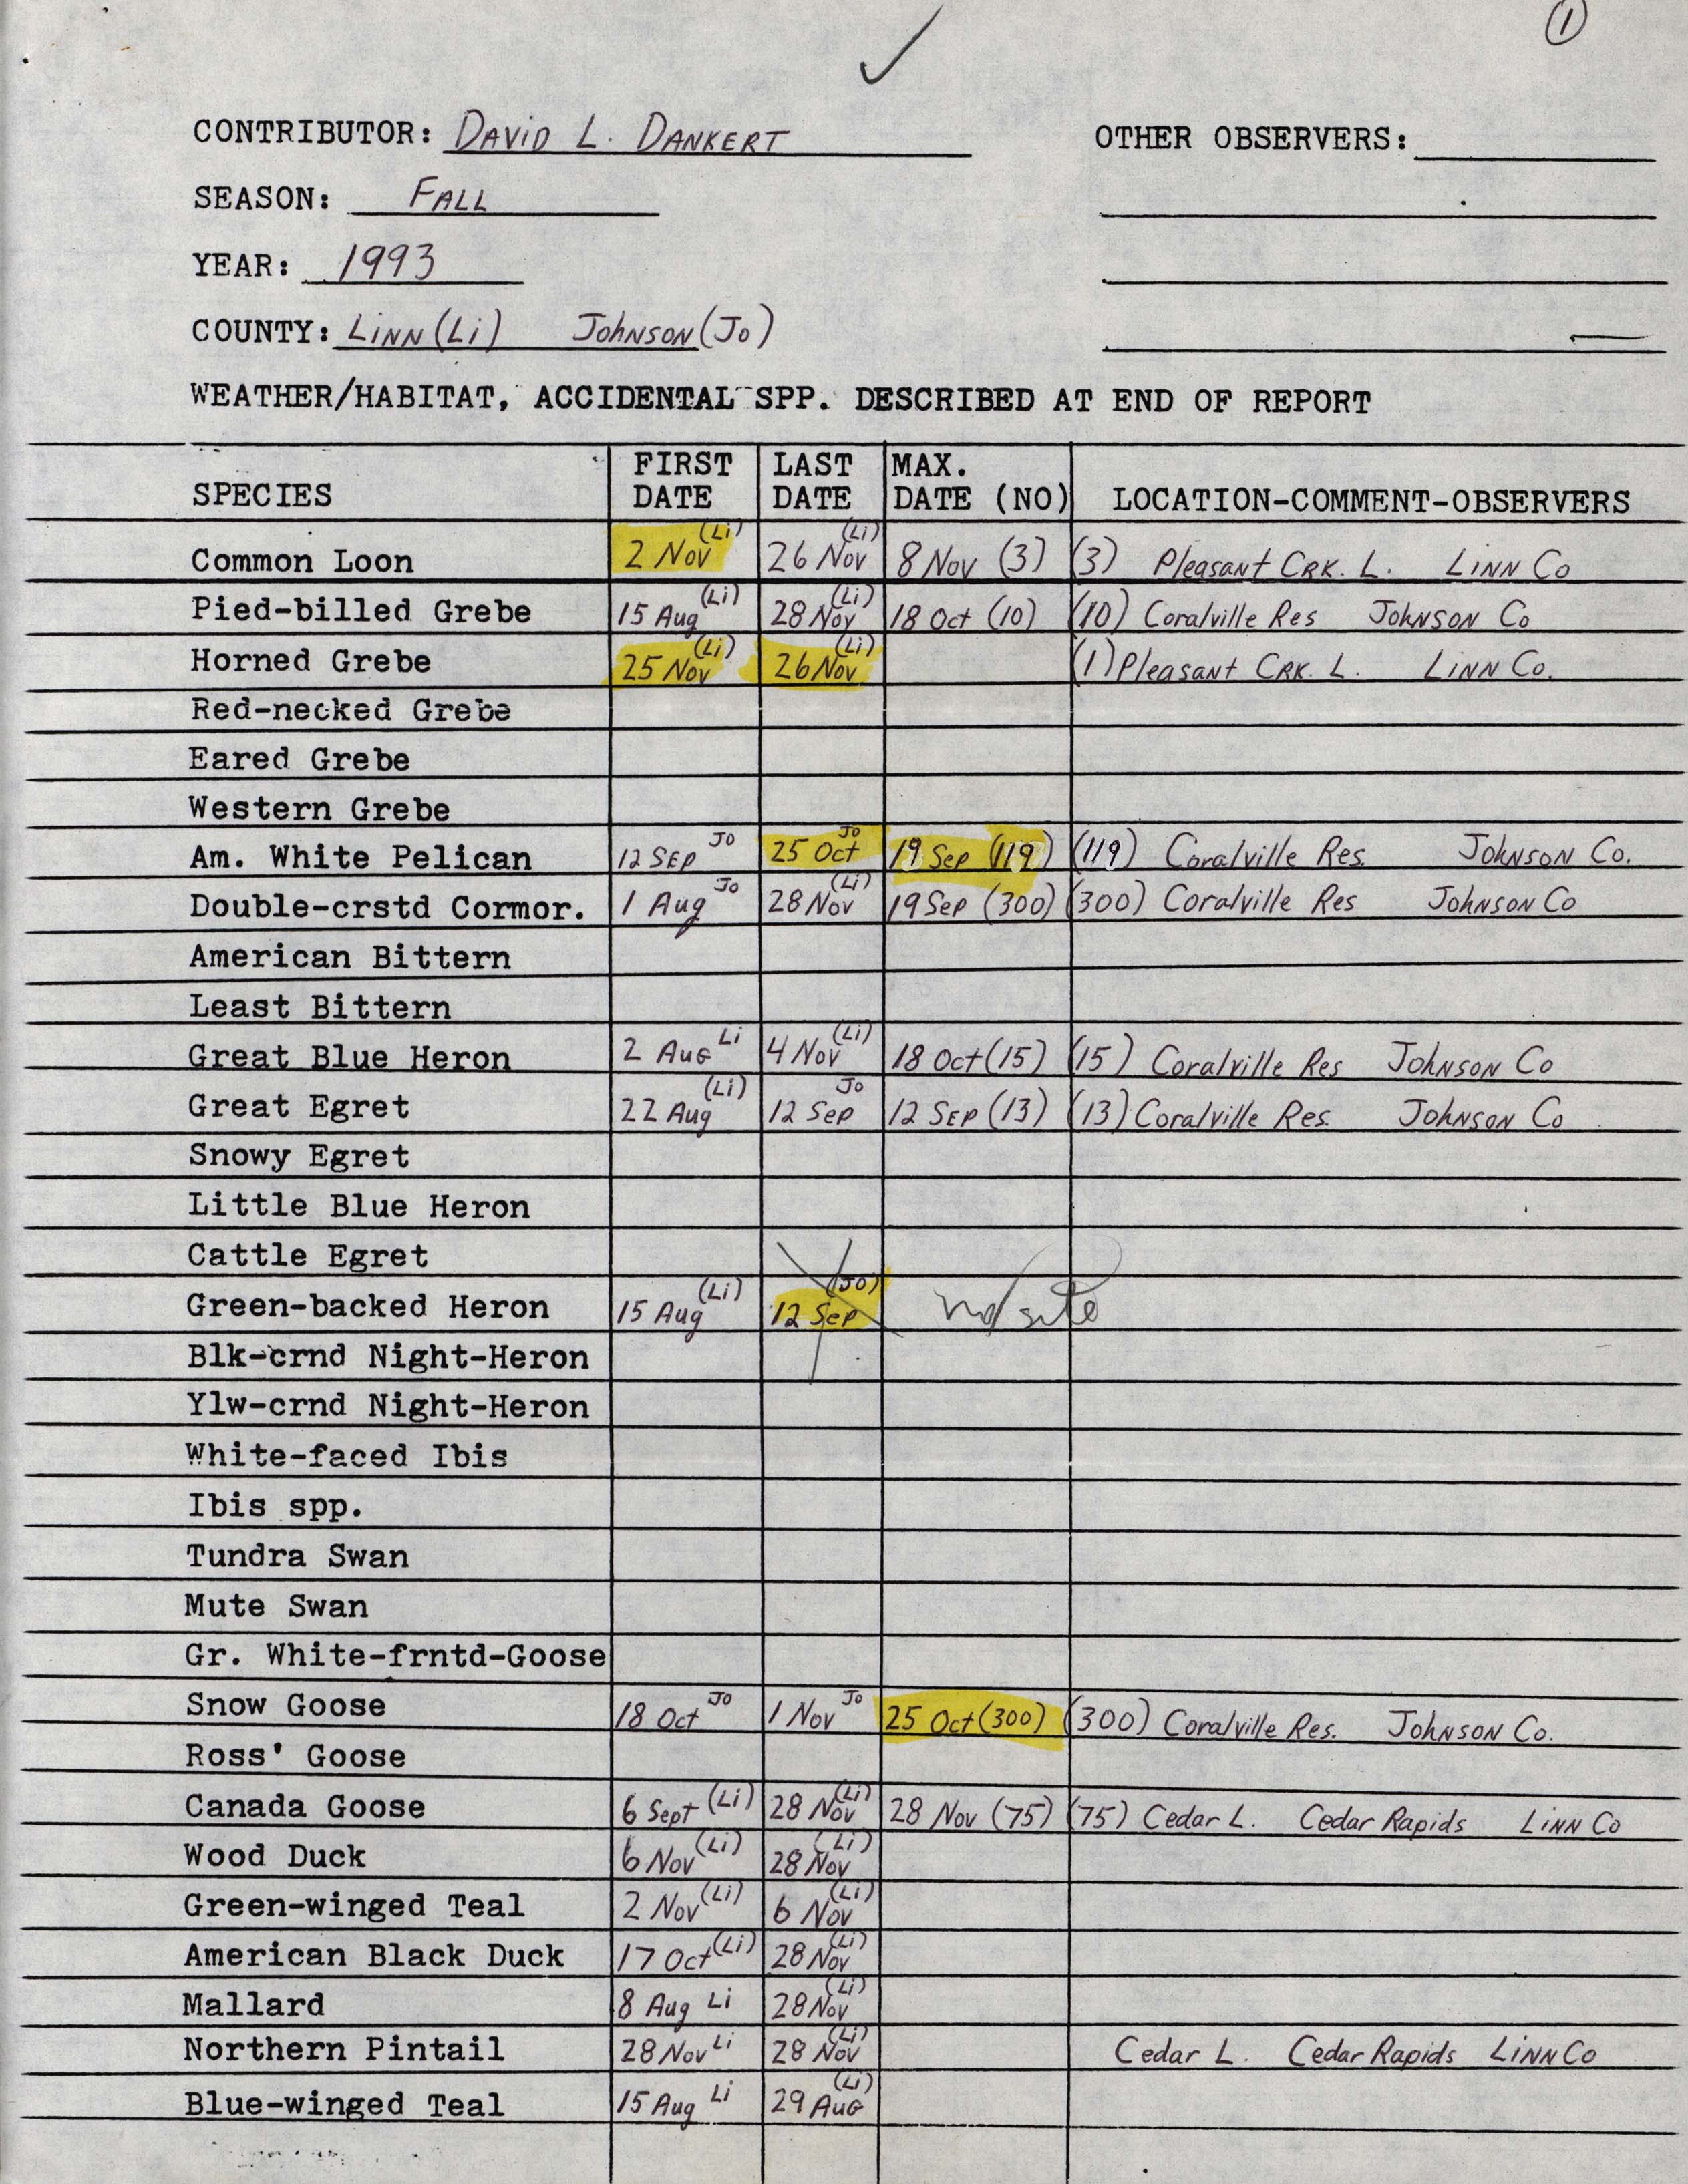 Field notes contributed by David L. Dankert, fall 1993